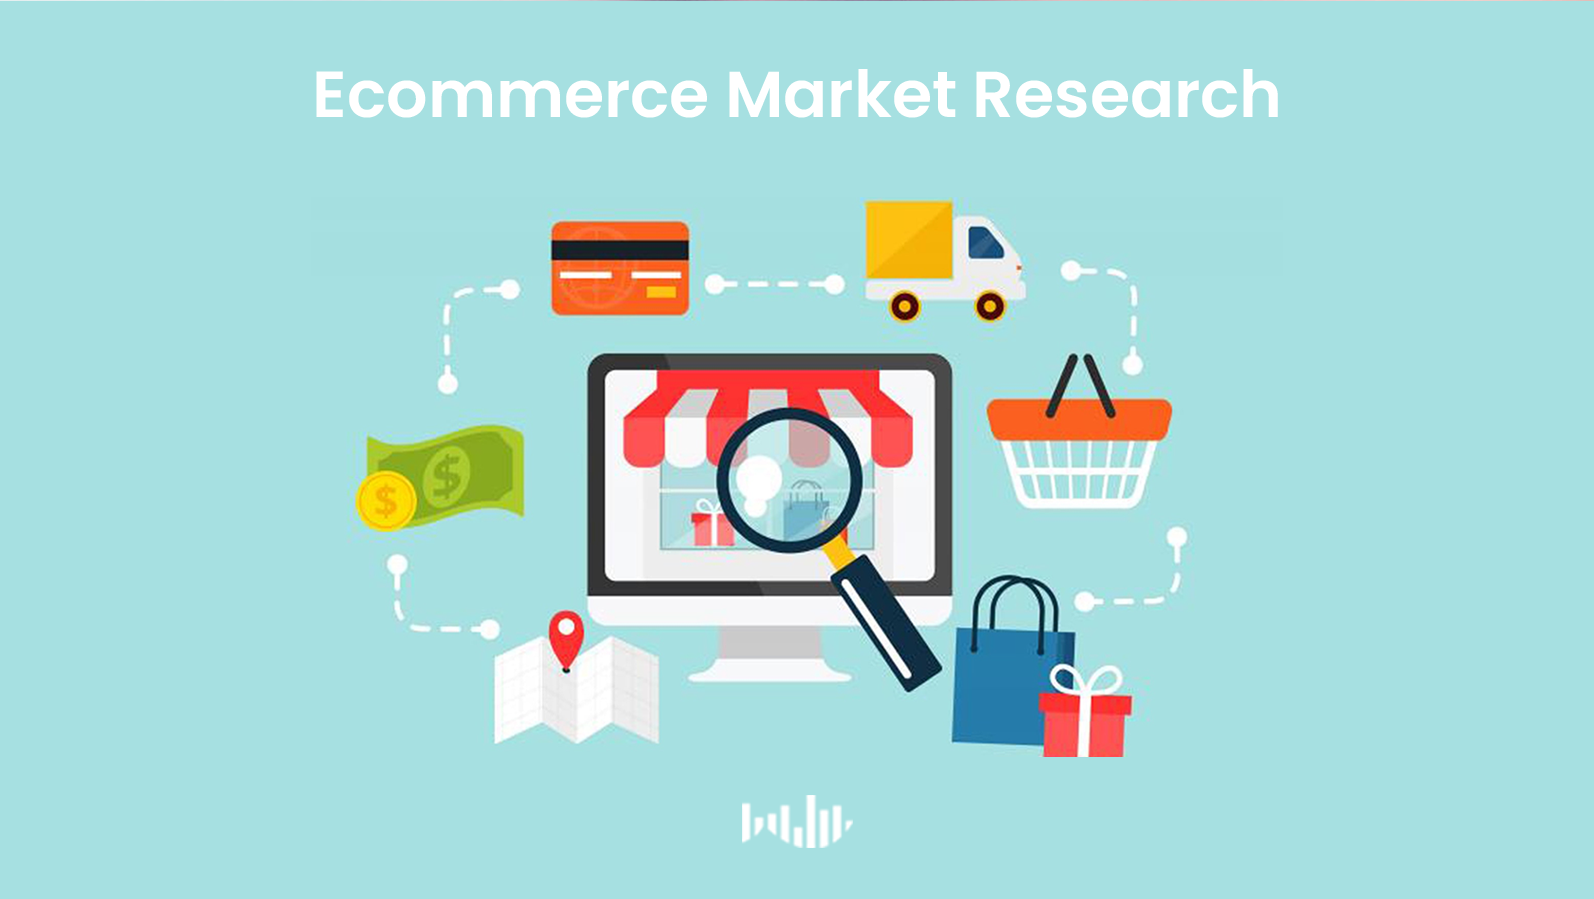 How to Conduct Online Market Research